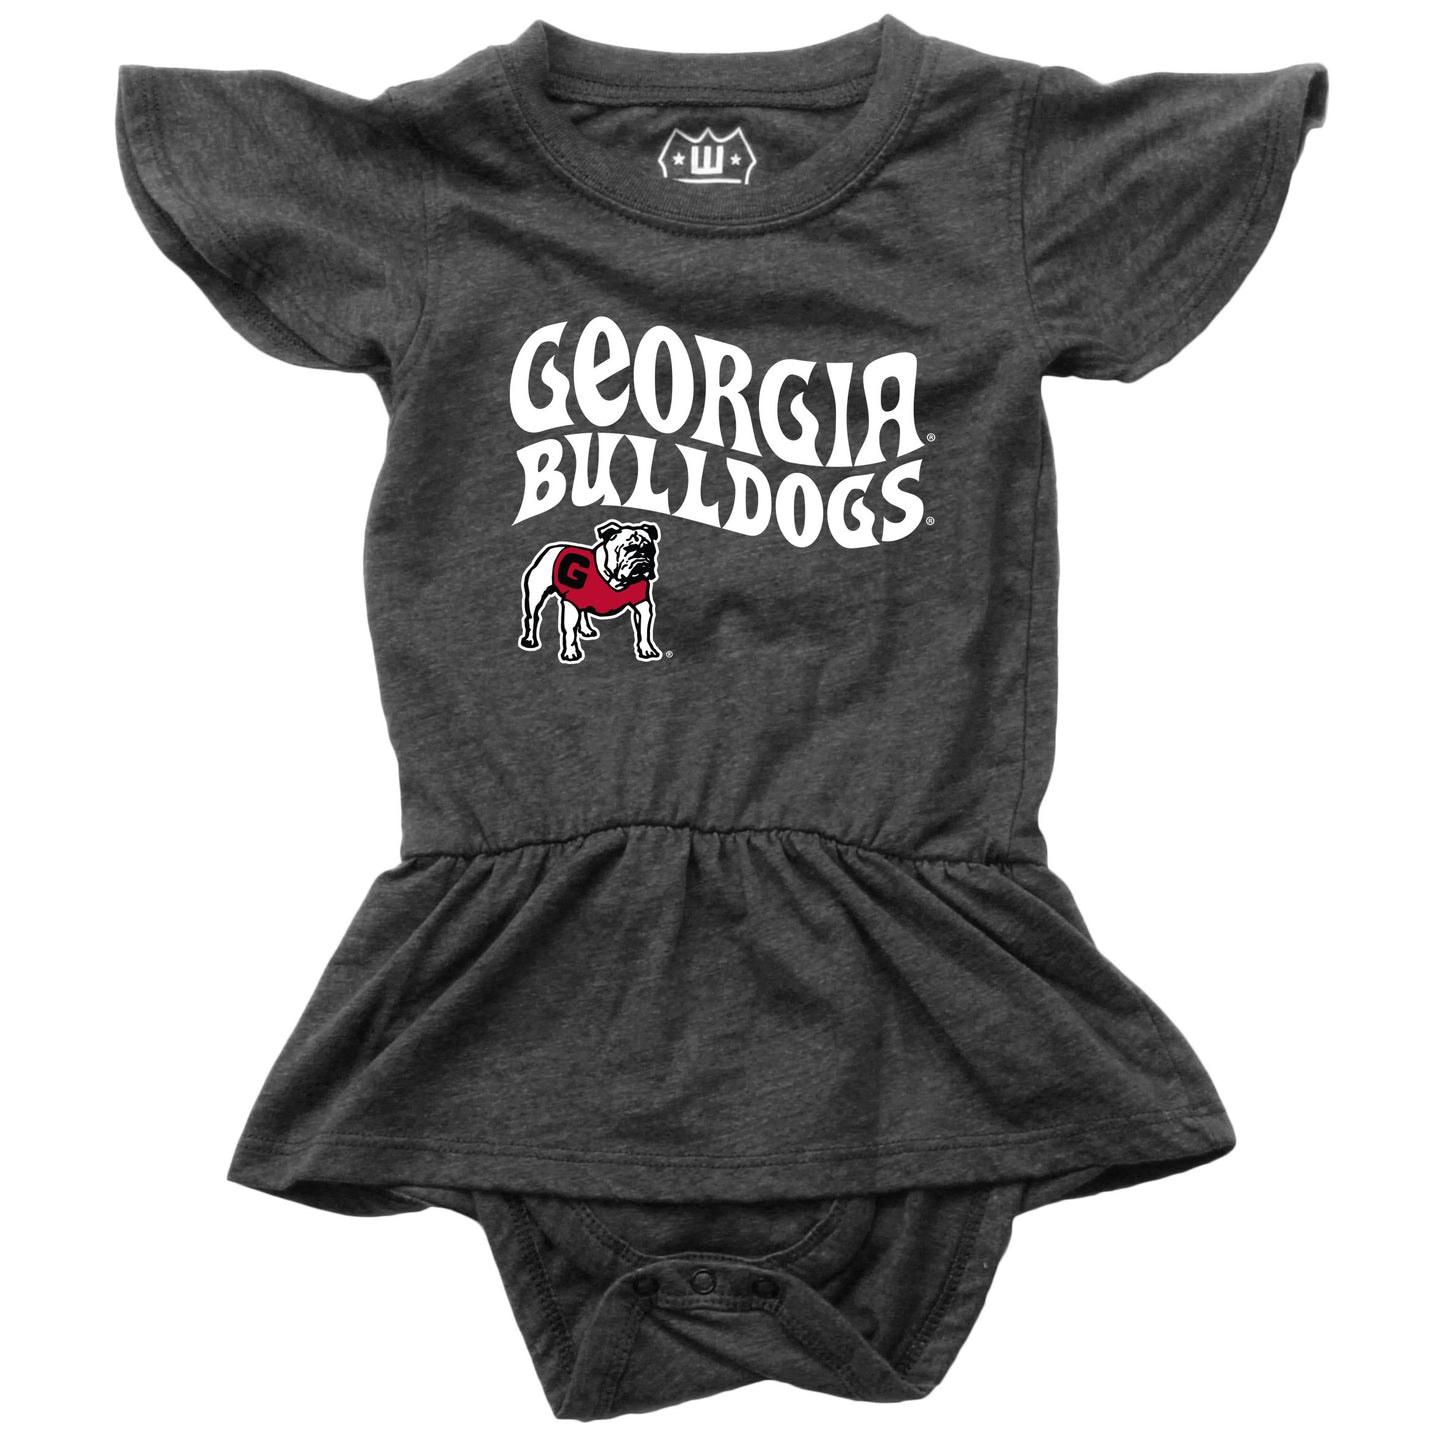 Georgia Bulldogs Wes and Willy Baby Girls College Team One Piece Hopper Skirt Black